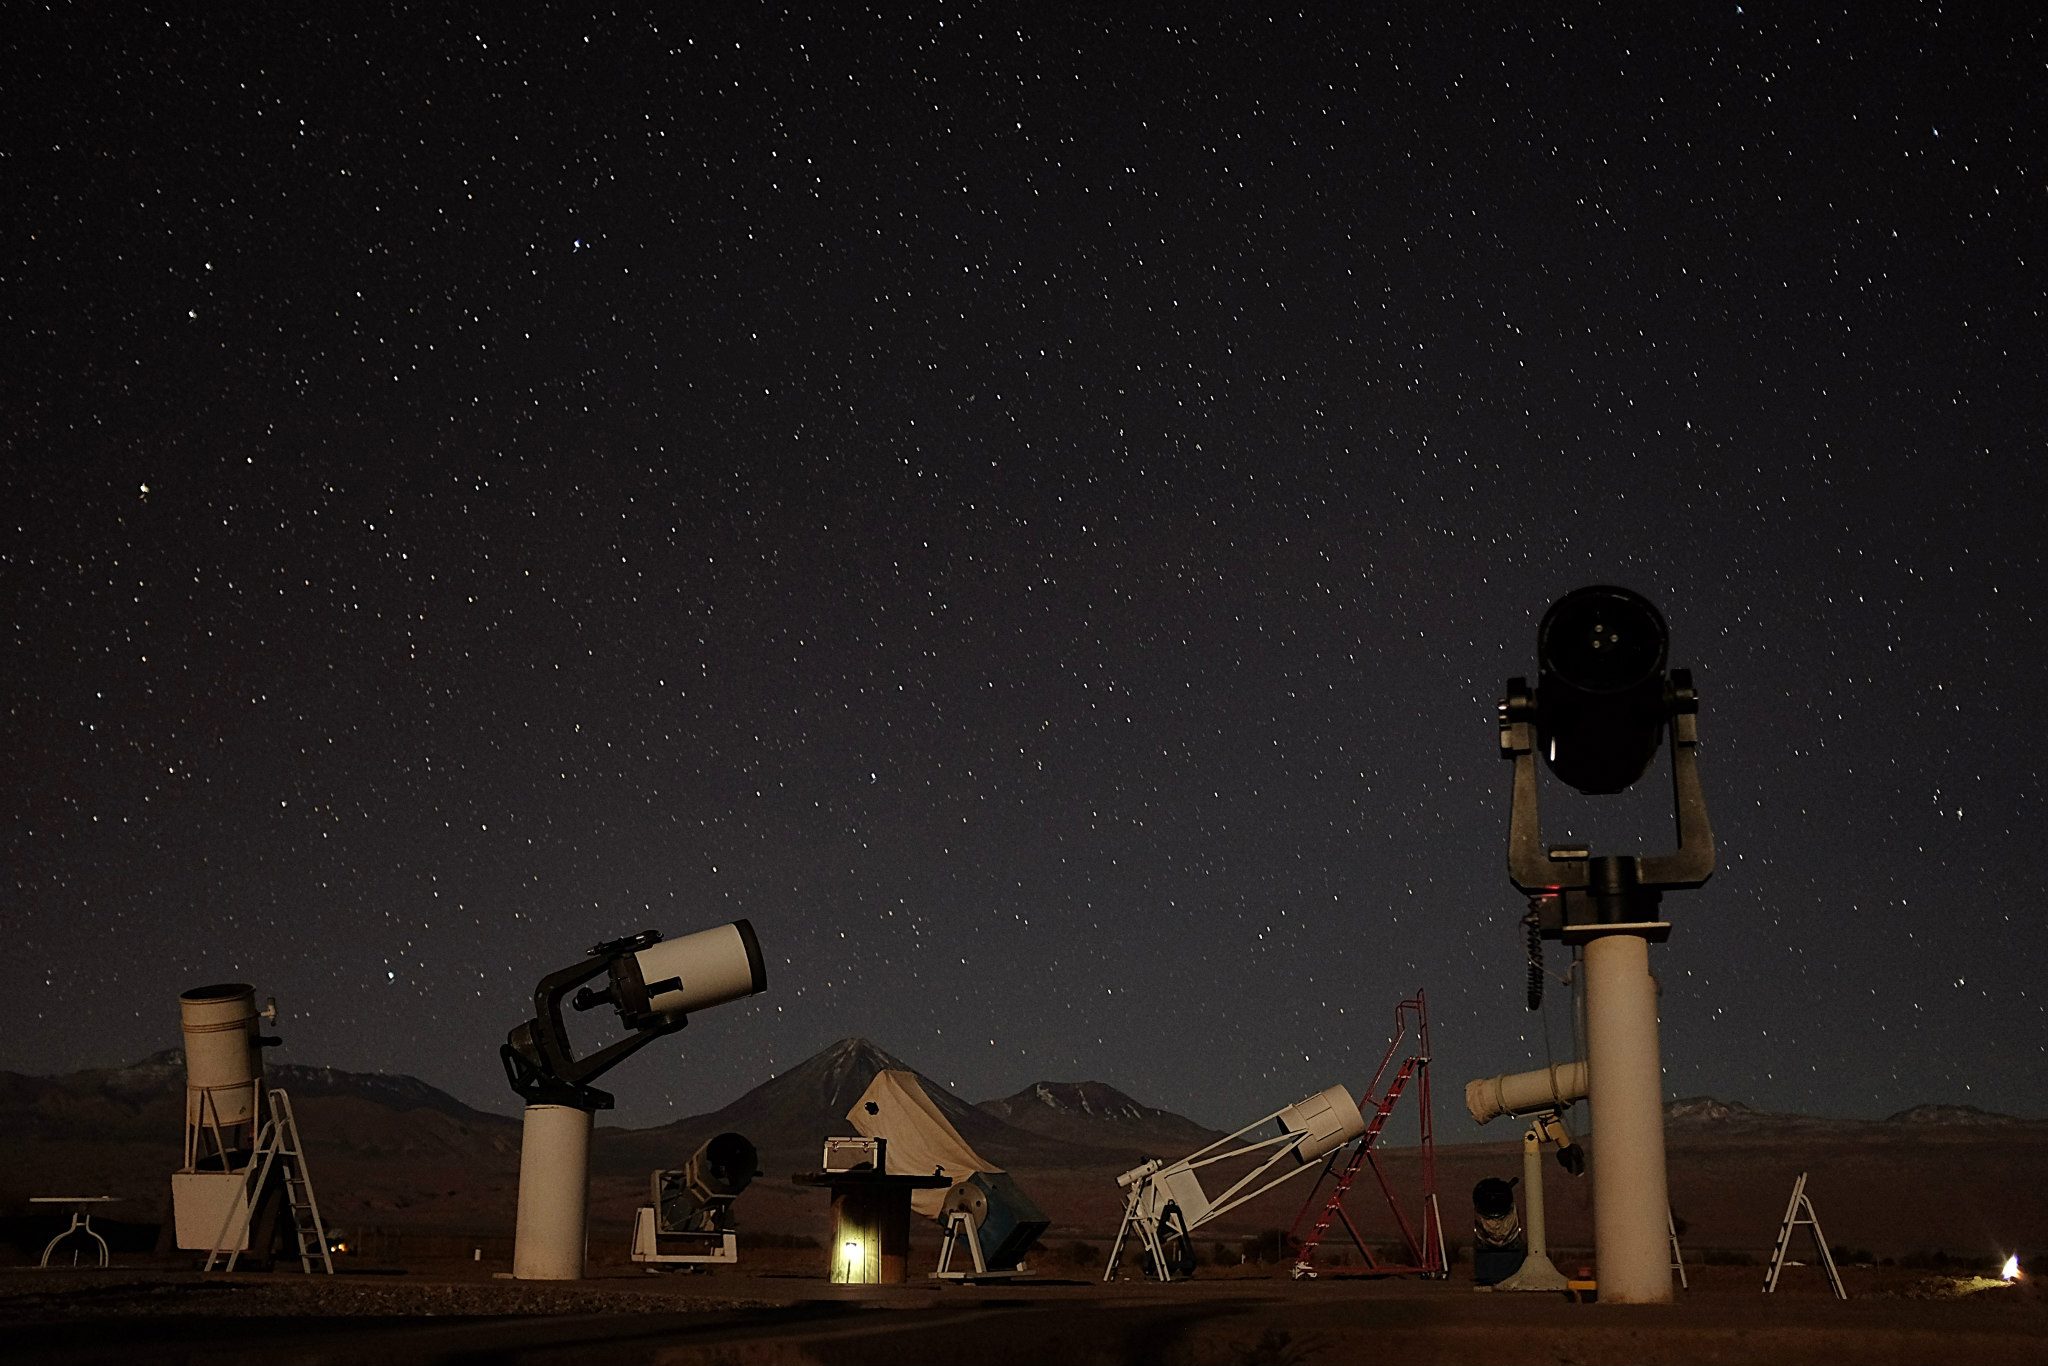 The Various Telescopes in our Star Tour